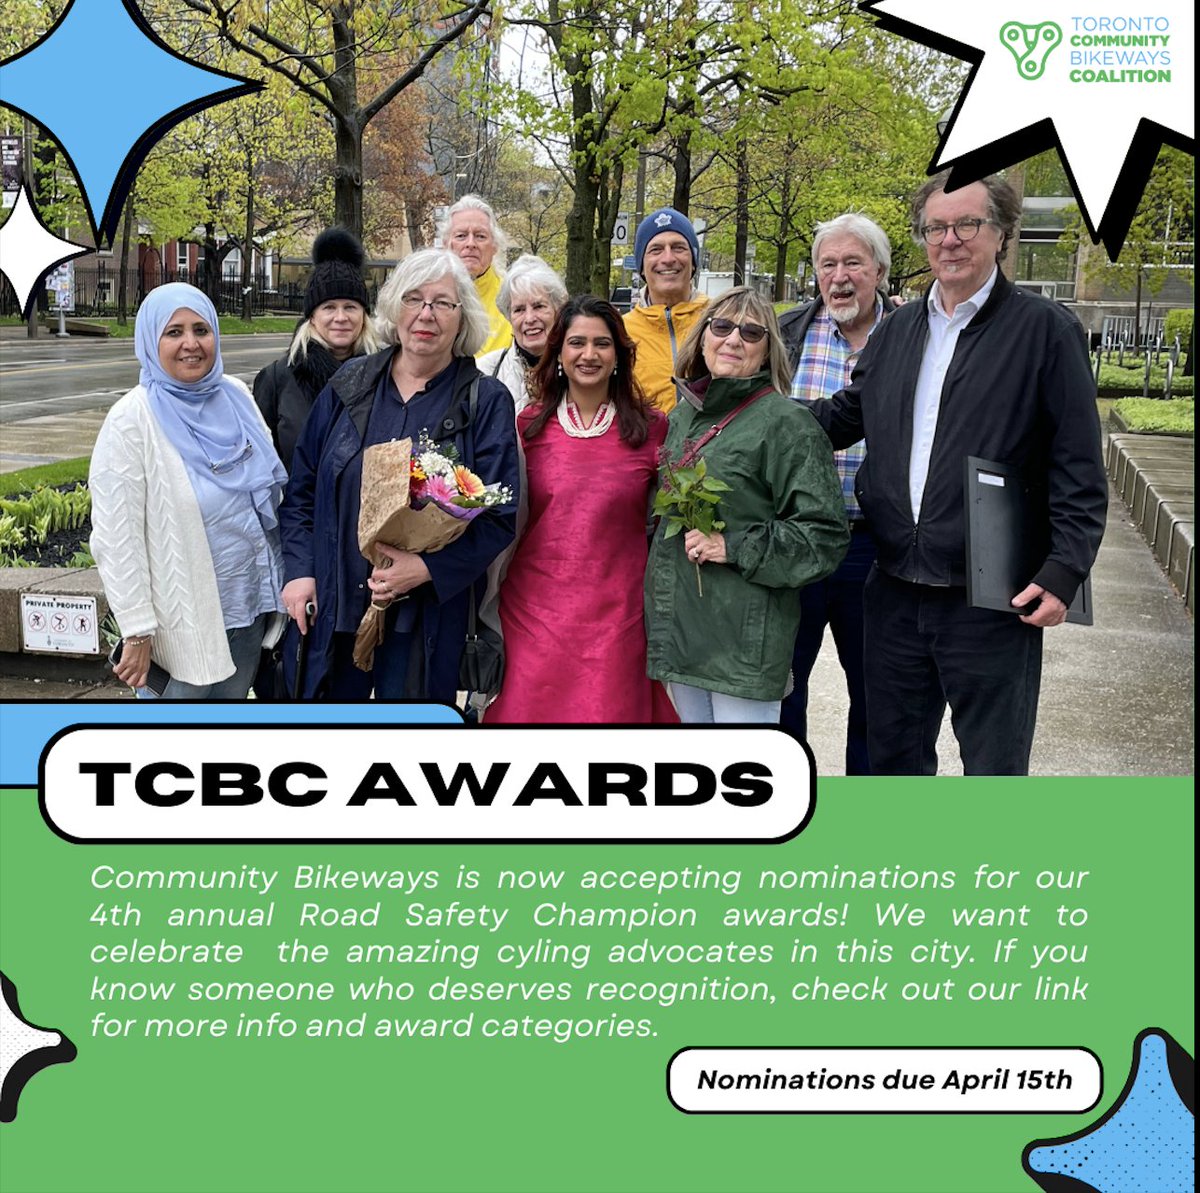 Our 4th annual Road Safety Champion awards ... business, suburban, emerging, and Wayne Scott awards. Deadline April 15. Check it out here ... communitybikewaysto.ca/community-advo… #biketo